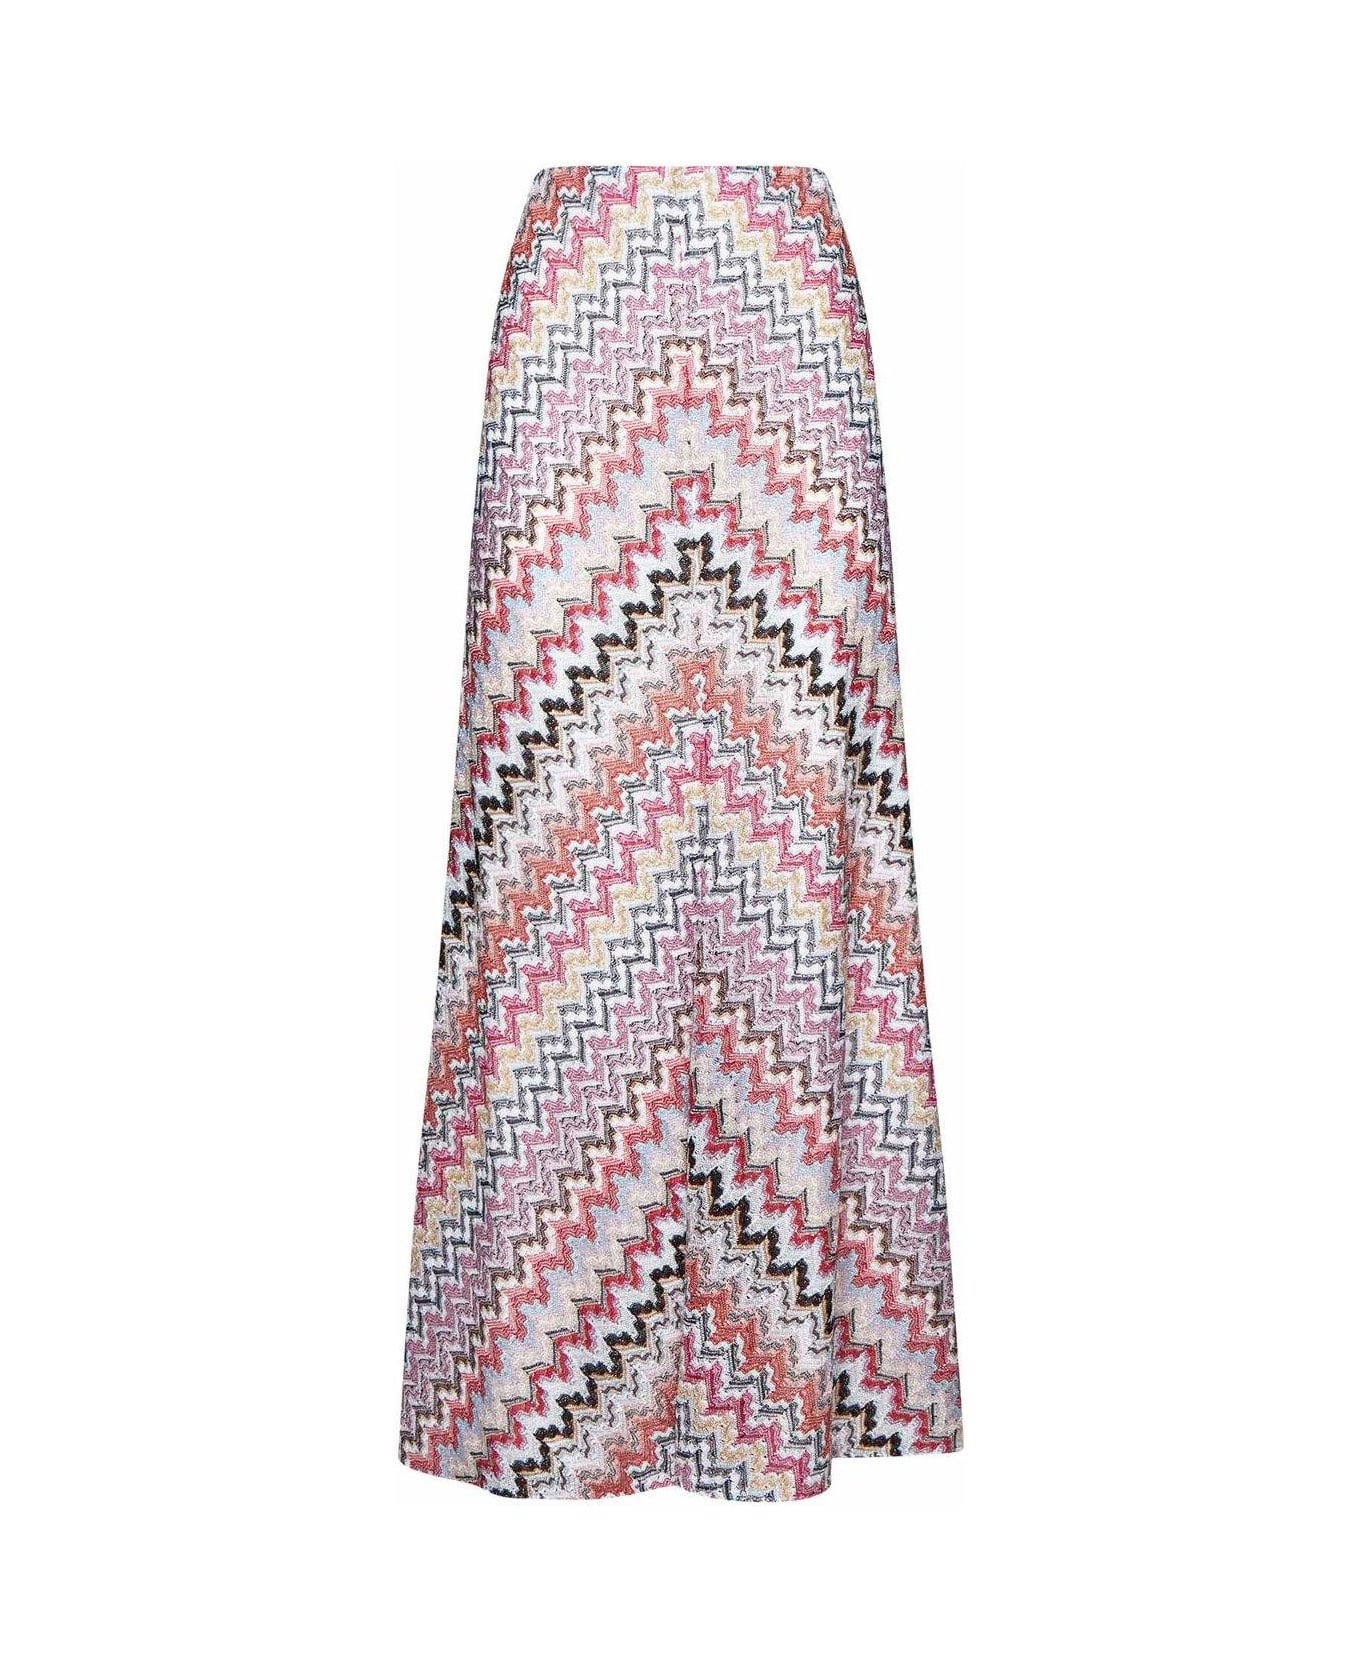 Missoni All-over Patterned Maxi Skirt - Pink スカート